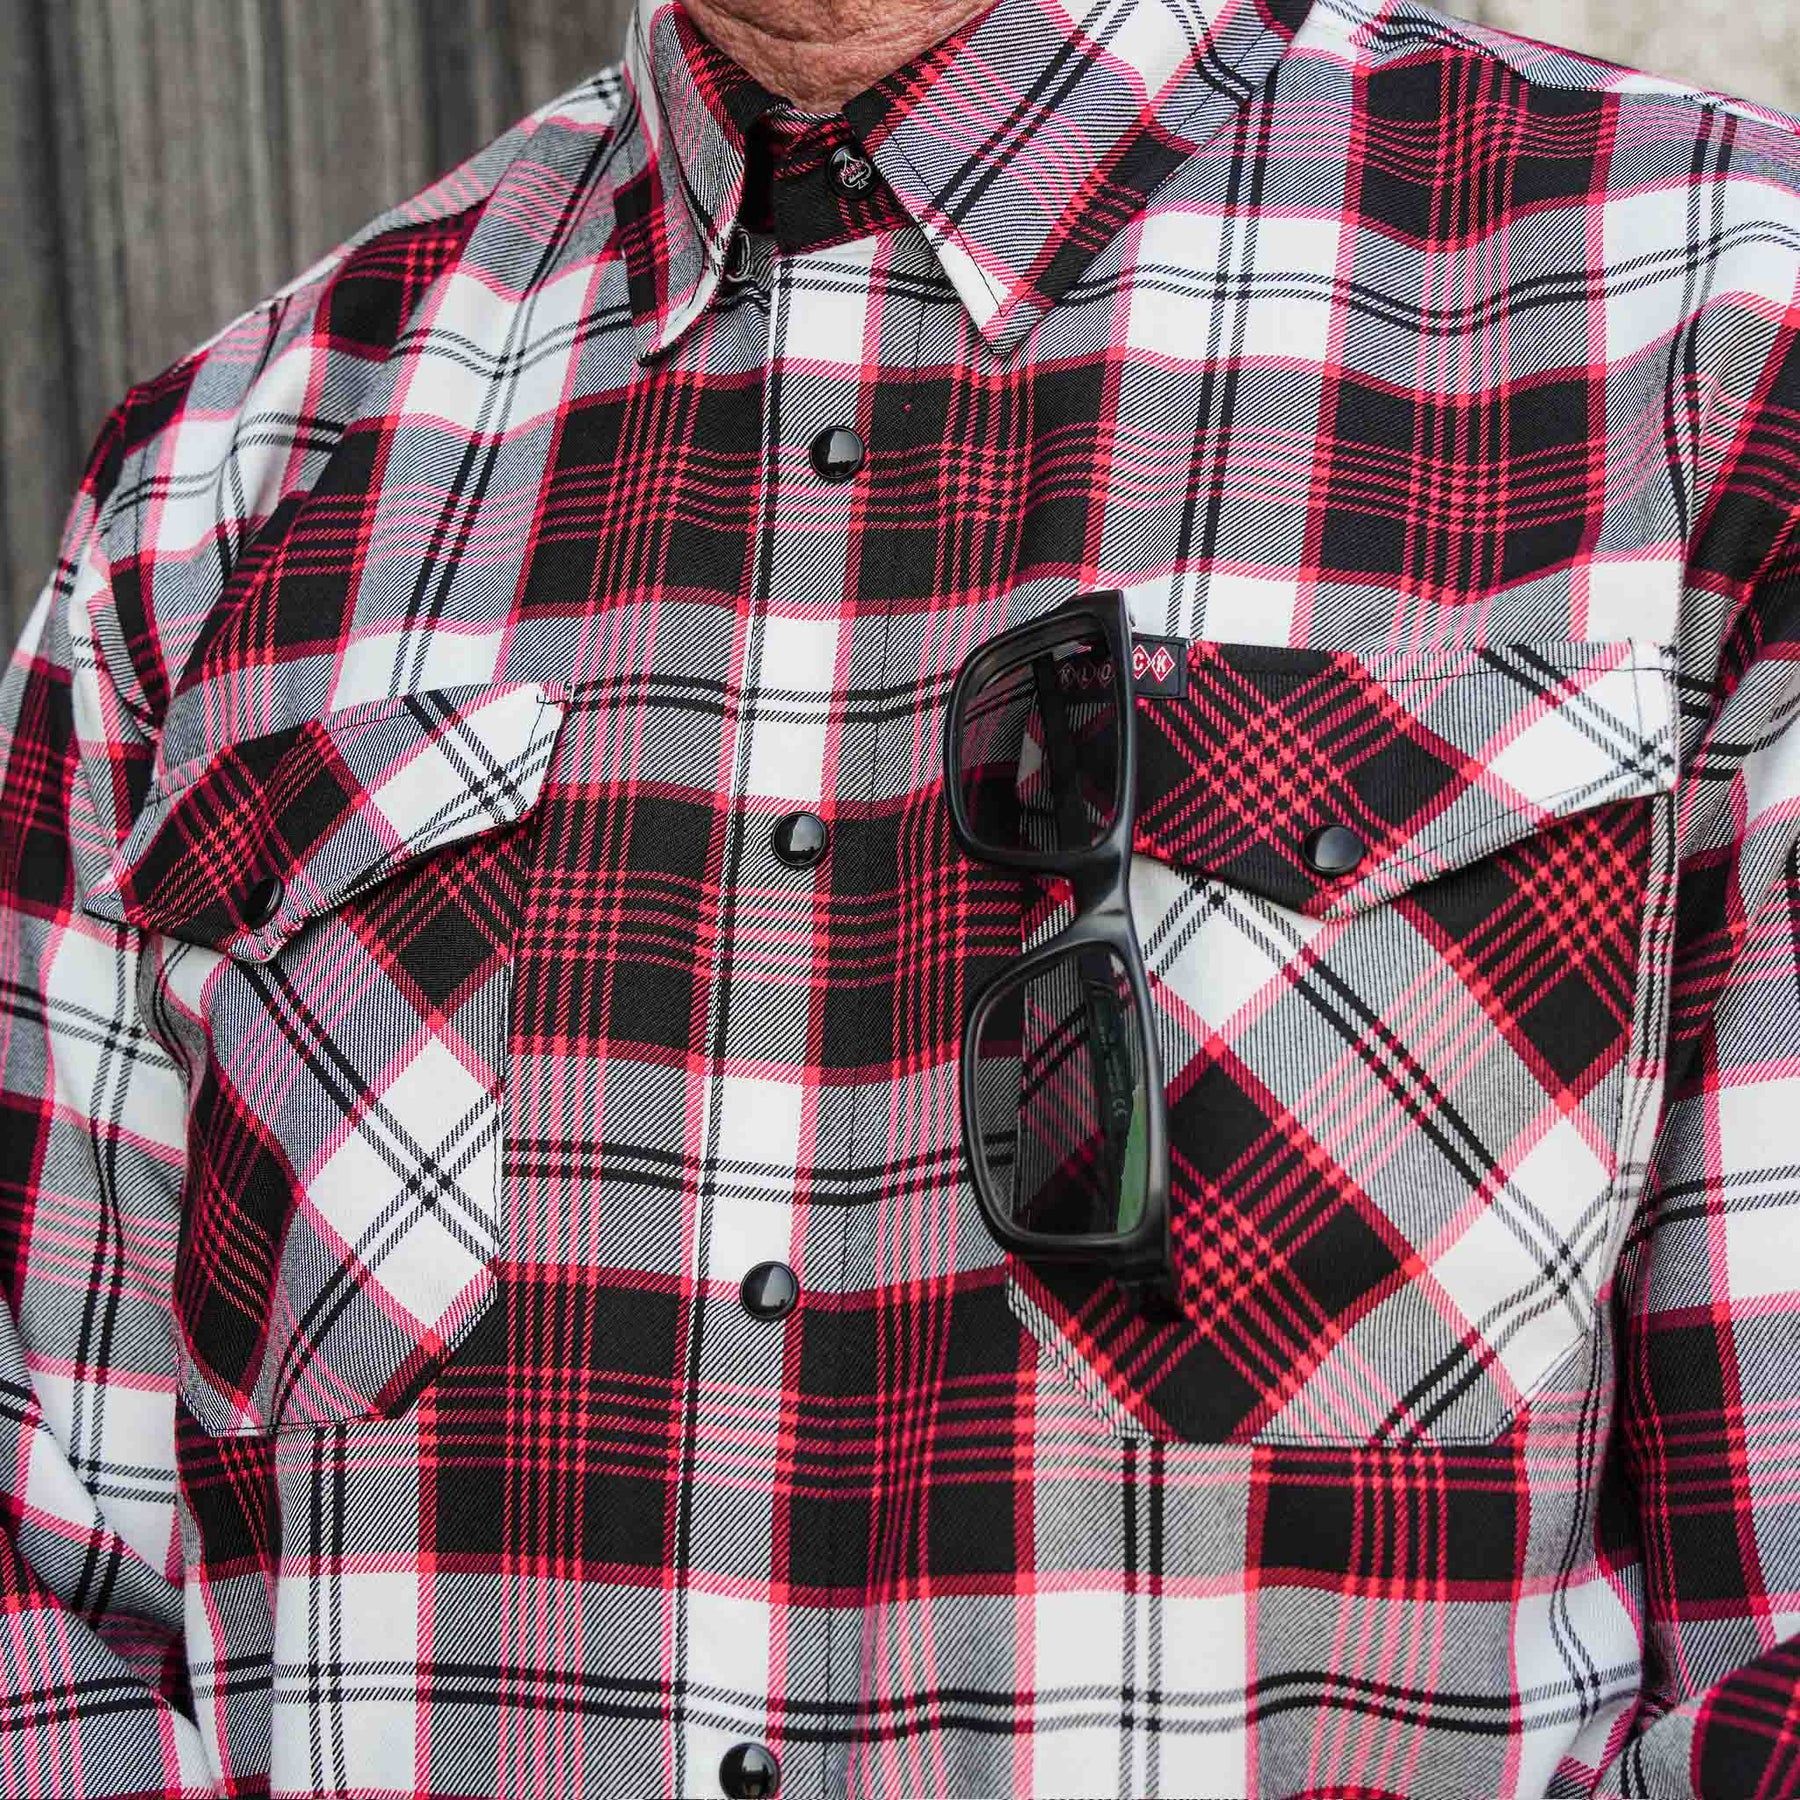 Klock Werks x Dixxon 25th Anniversary Flannel with dual button down flap chest pockets with utility slot for pens, sunglasses, etc.